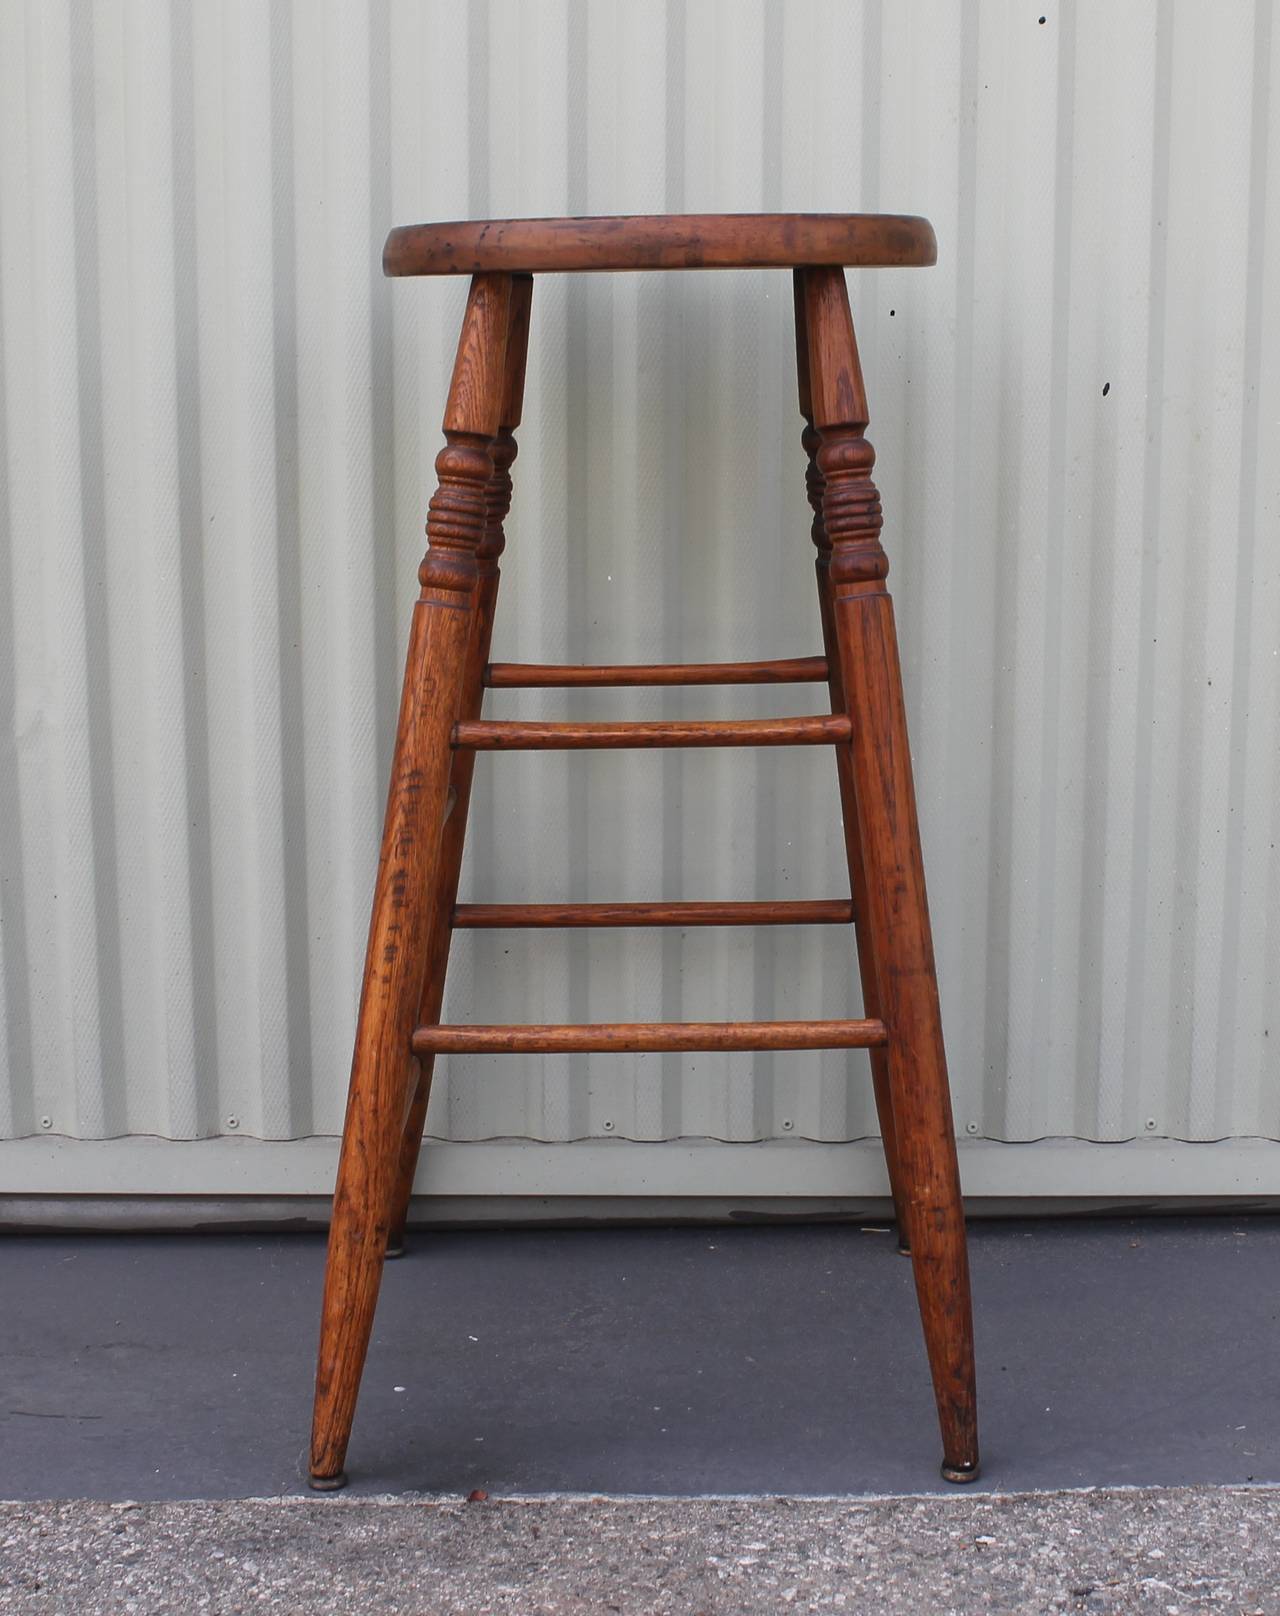 This is a early weavers stool from new England with beautiful lines.Wonderful worn turnings. The condition is very good.